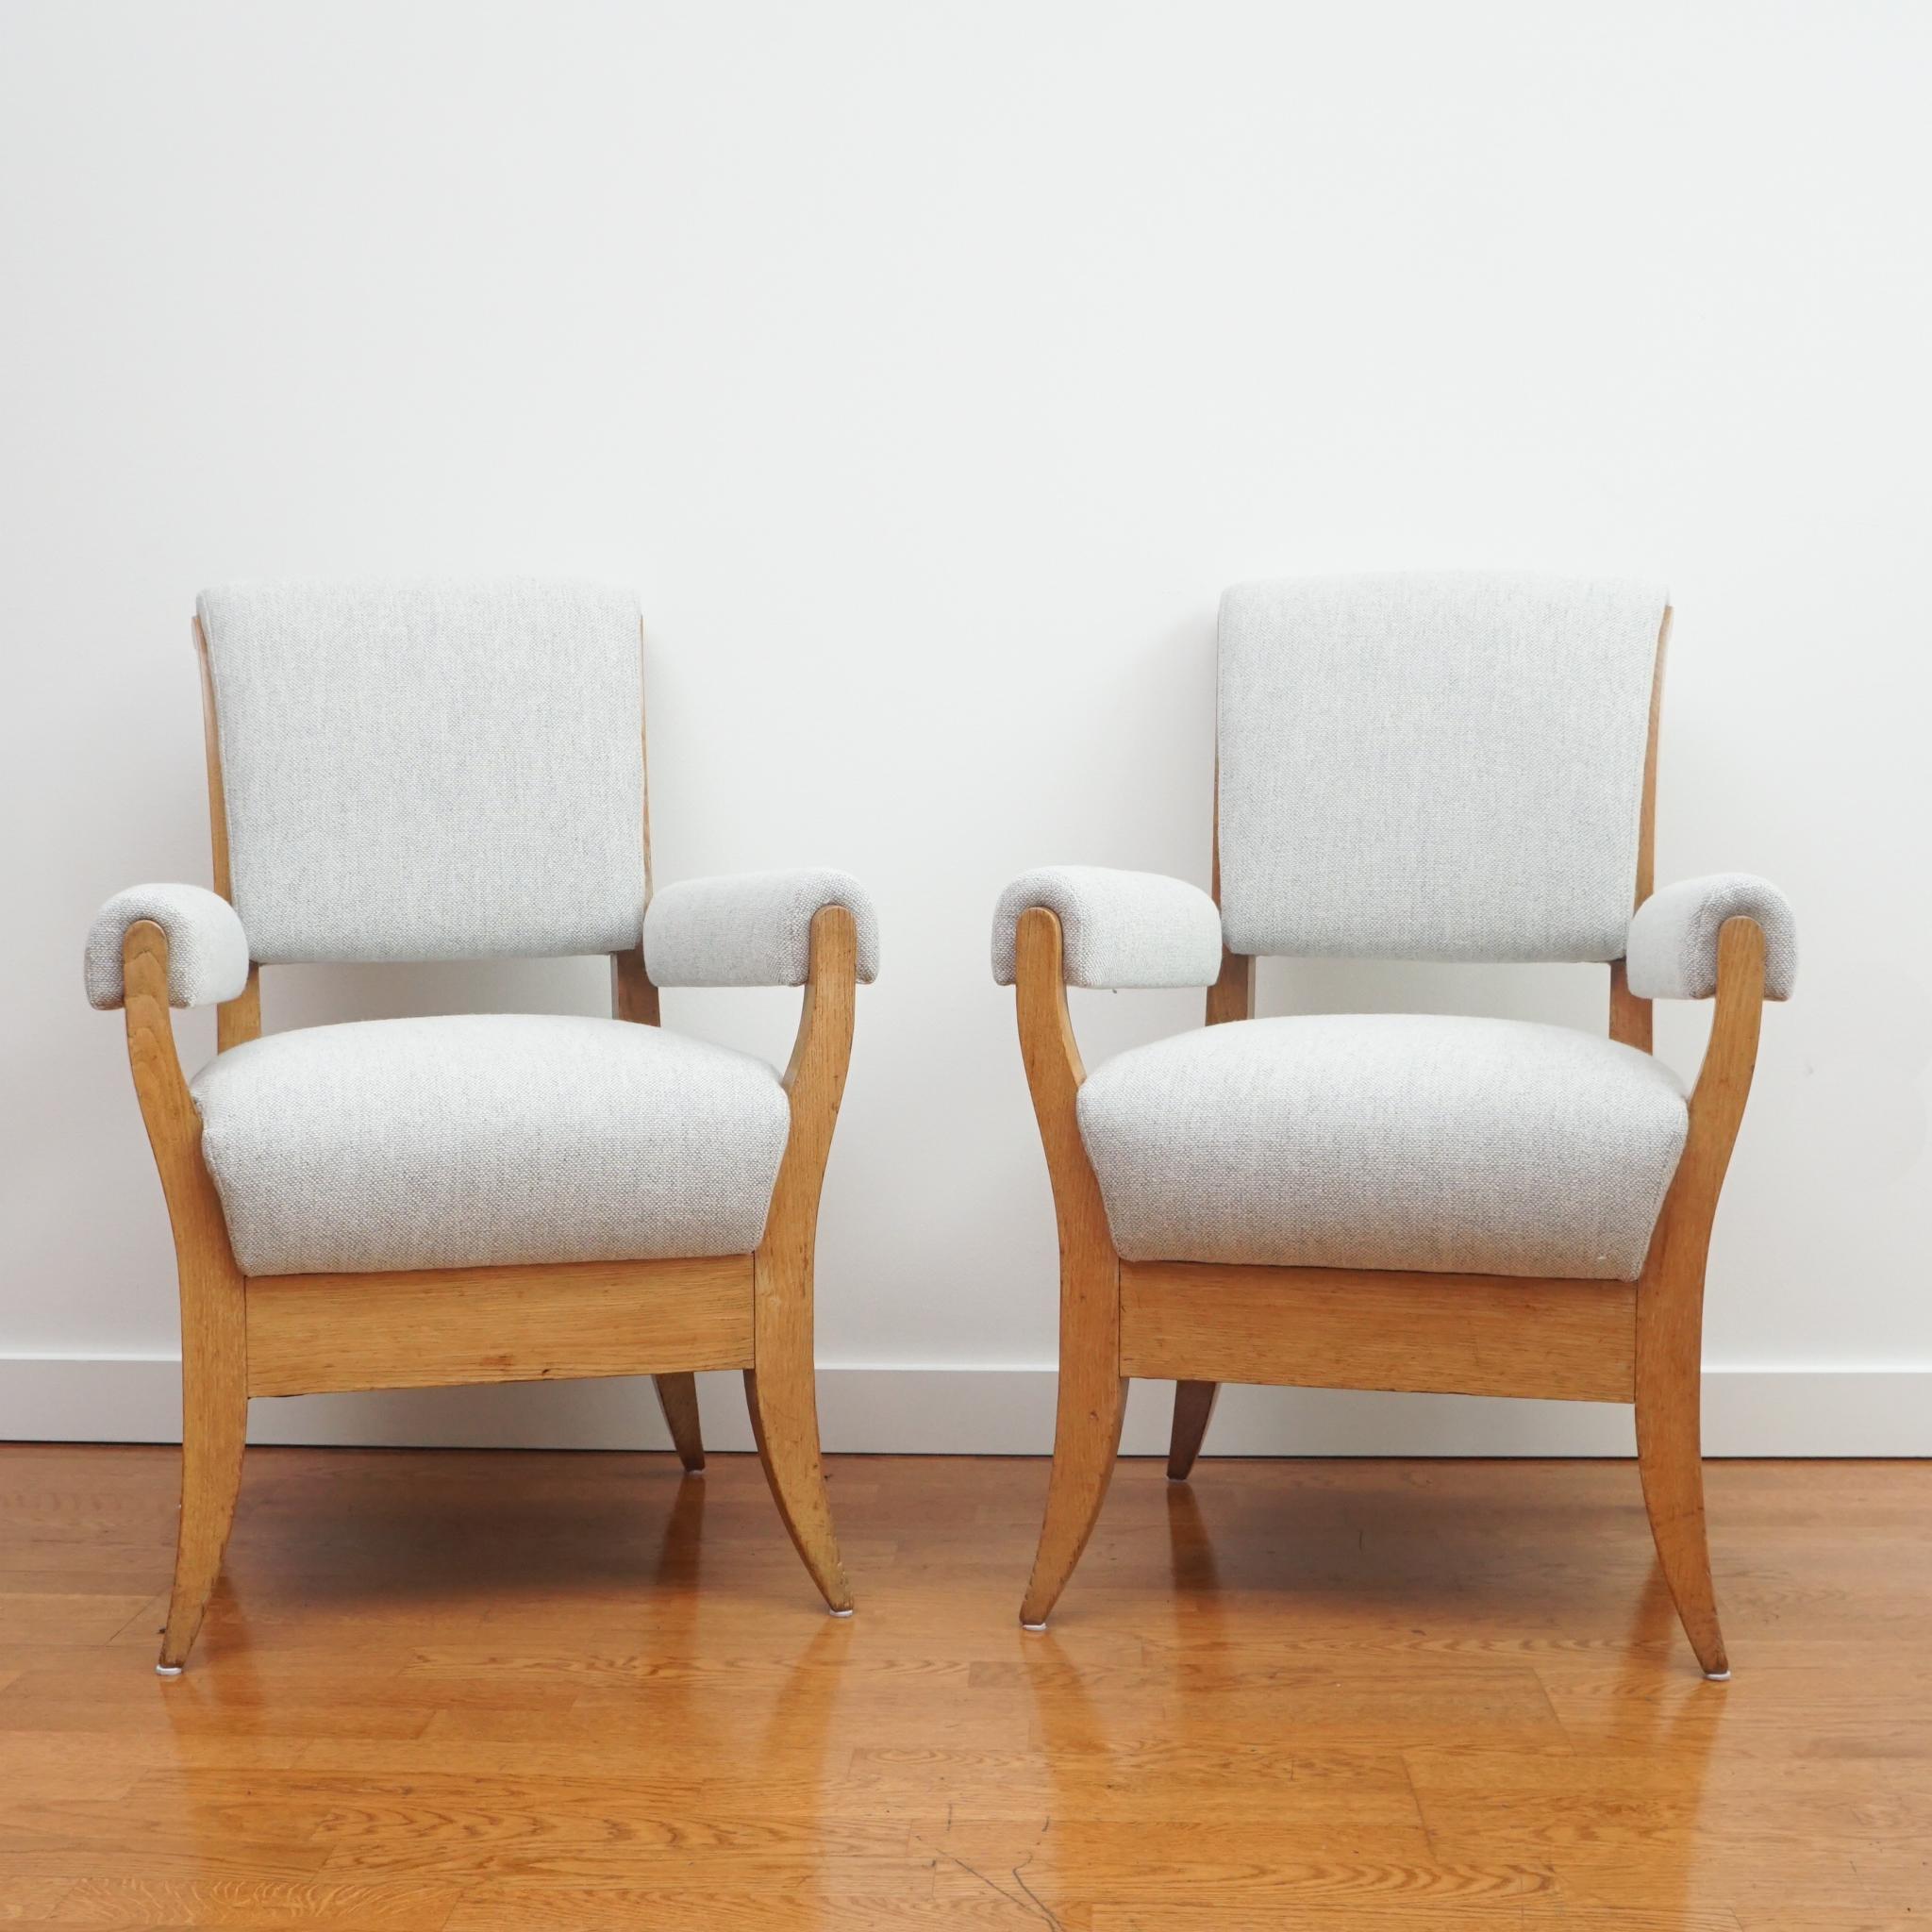 The splayed legs, upholstered arm rests and beefy wood frames of these oak armchairs from the 1940s contributes to their unique appeal. By replacing the original brown leather upholstery with a light-colored, woven fabric, the chairs now look fresh,